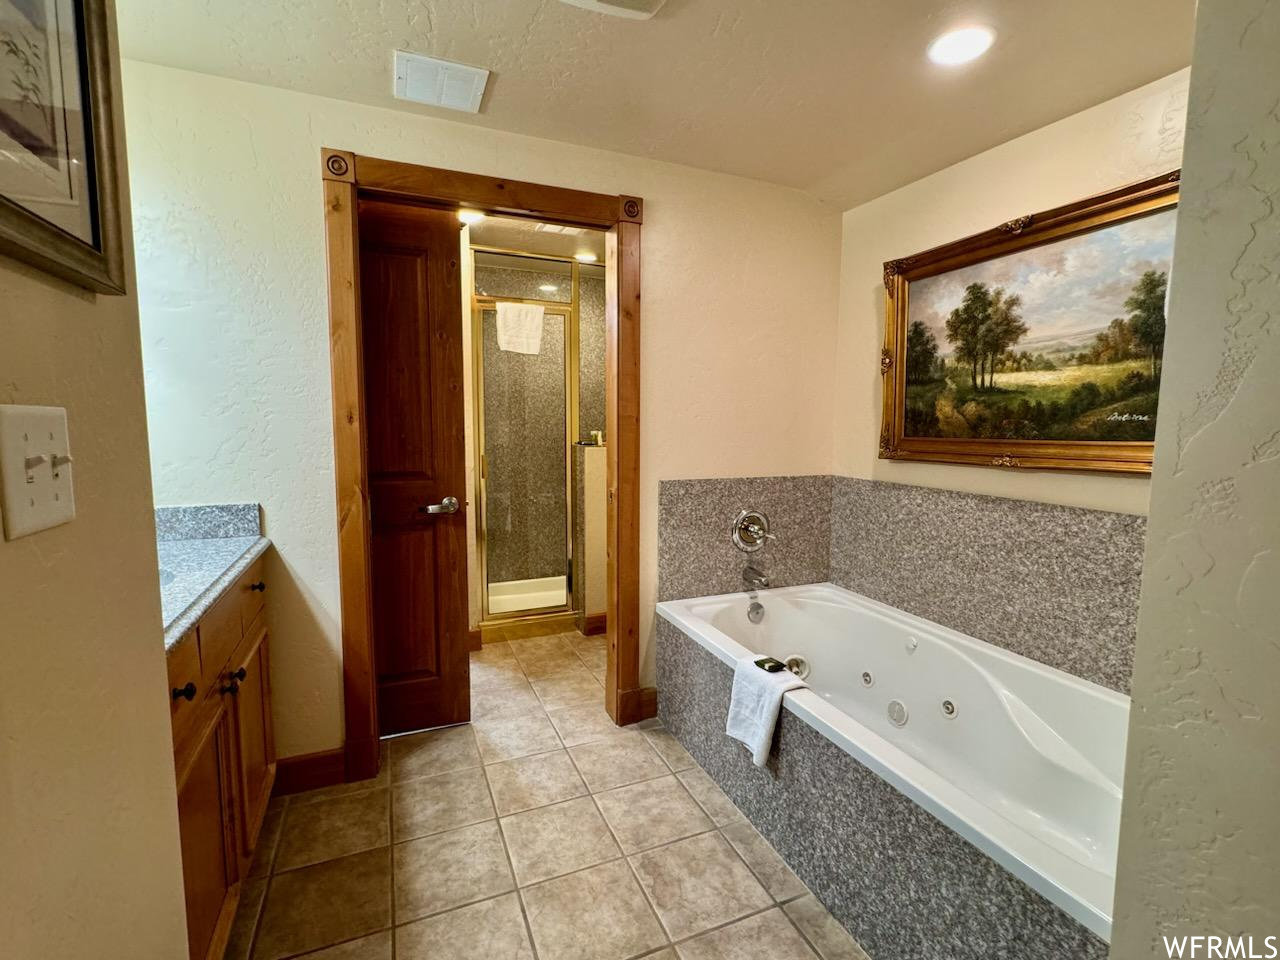 Bathroom featuring separate shower and tub, tile floors, a textured ceiling, and vanity